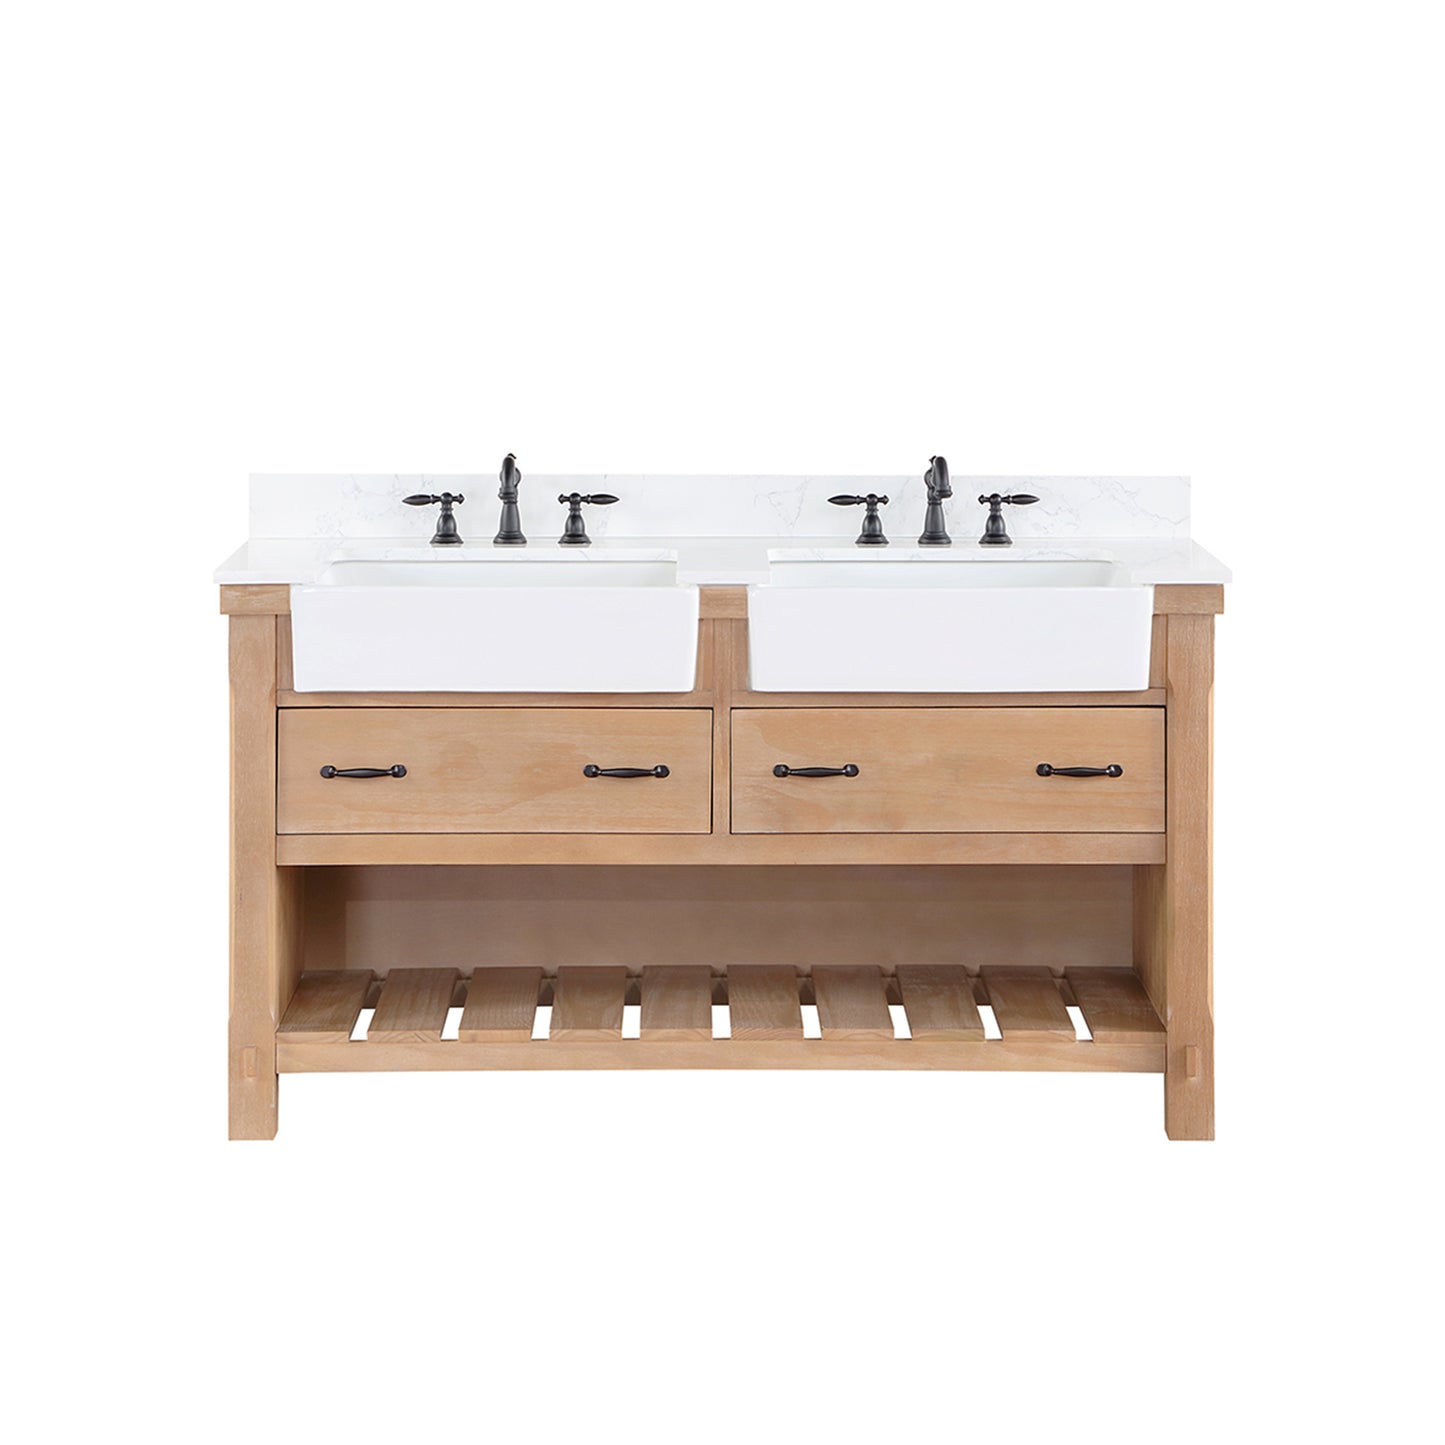 Villareal 60" Double Bath Vanity in Weathered Pine with Composite Stone Top in White, White Farmhouse Basin